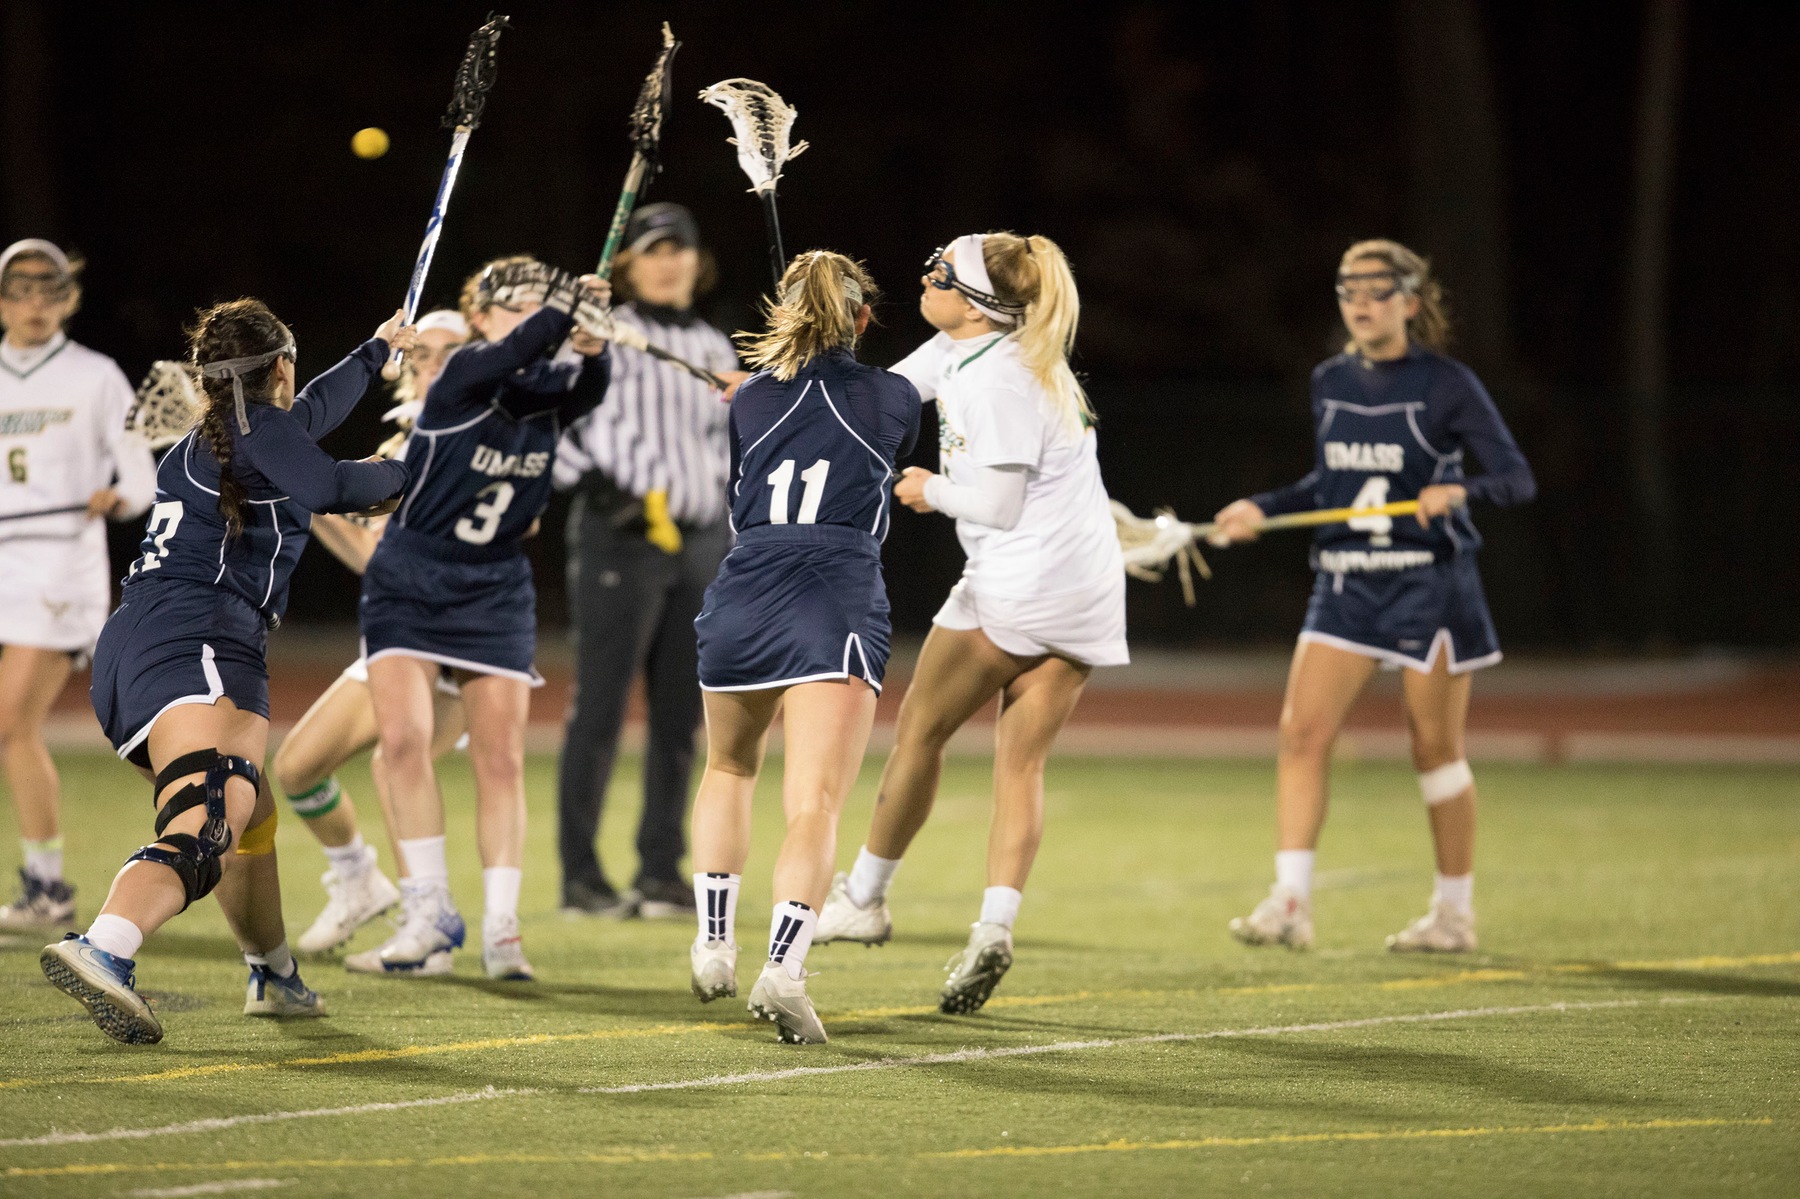 Falcons Fall to Corsairs in Non-Conference Lacrosse Action 13-10